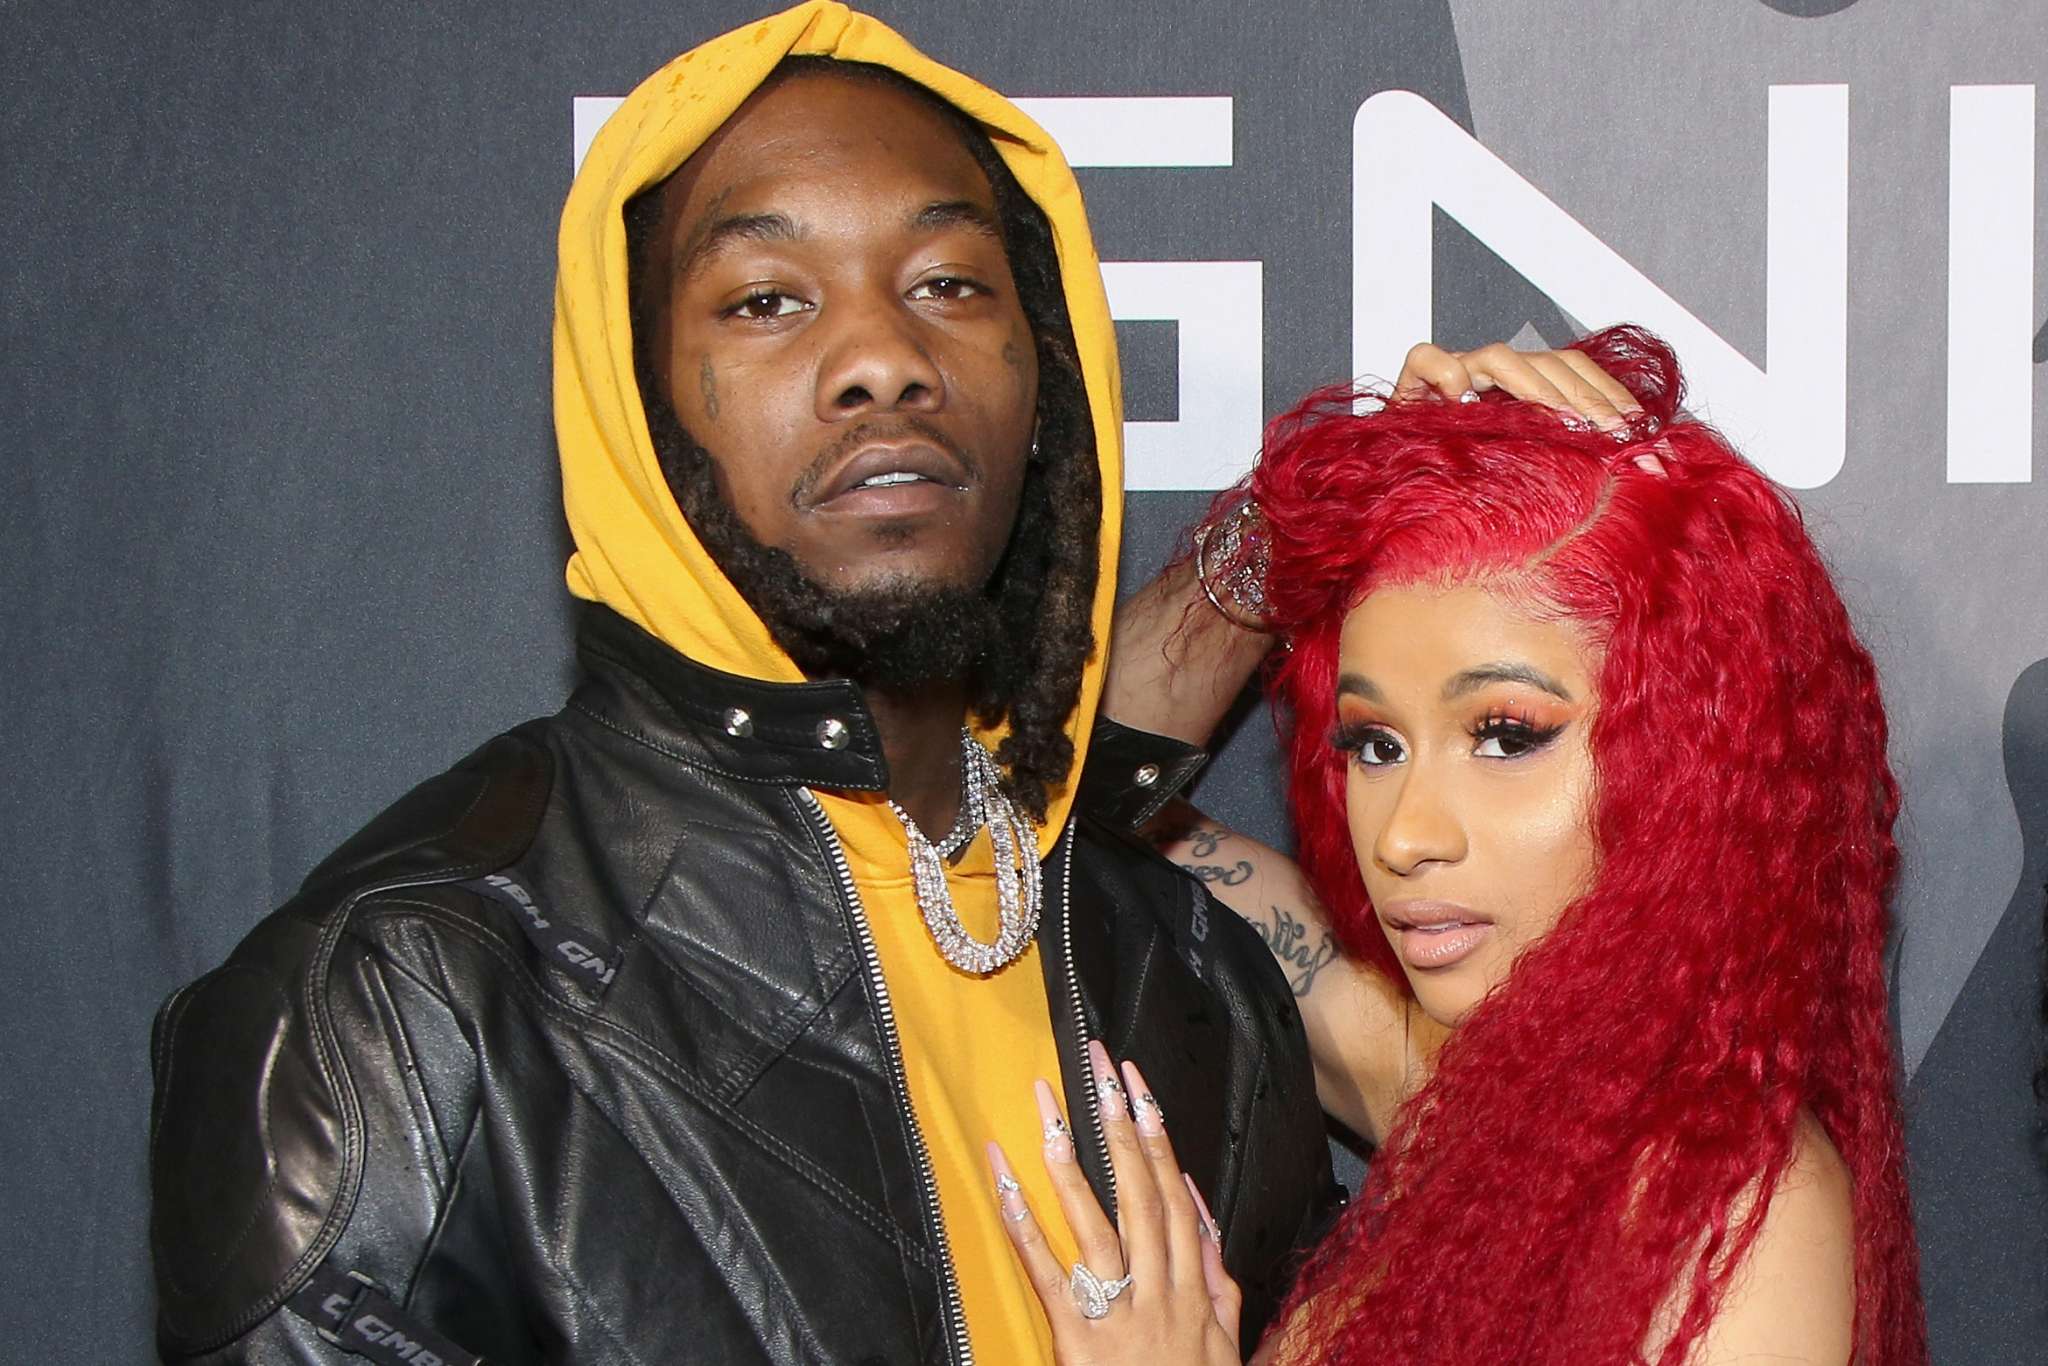 Cardi B And Offset's Family Photo With Kulture Has People Upset - Here's The Reason